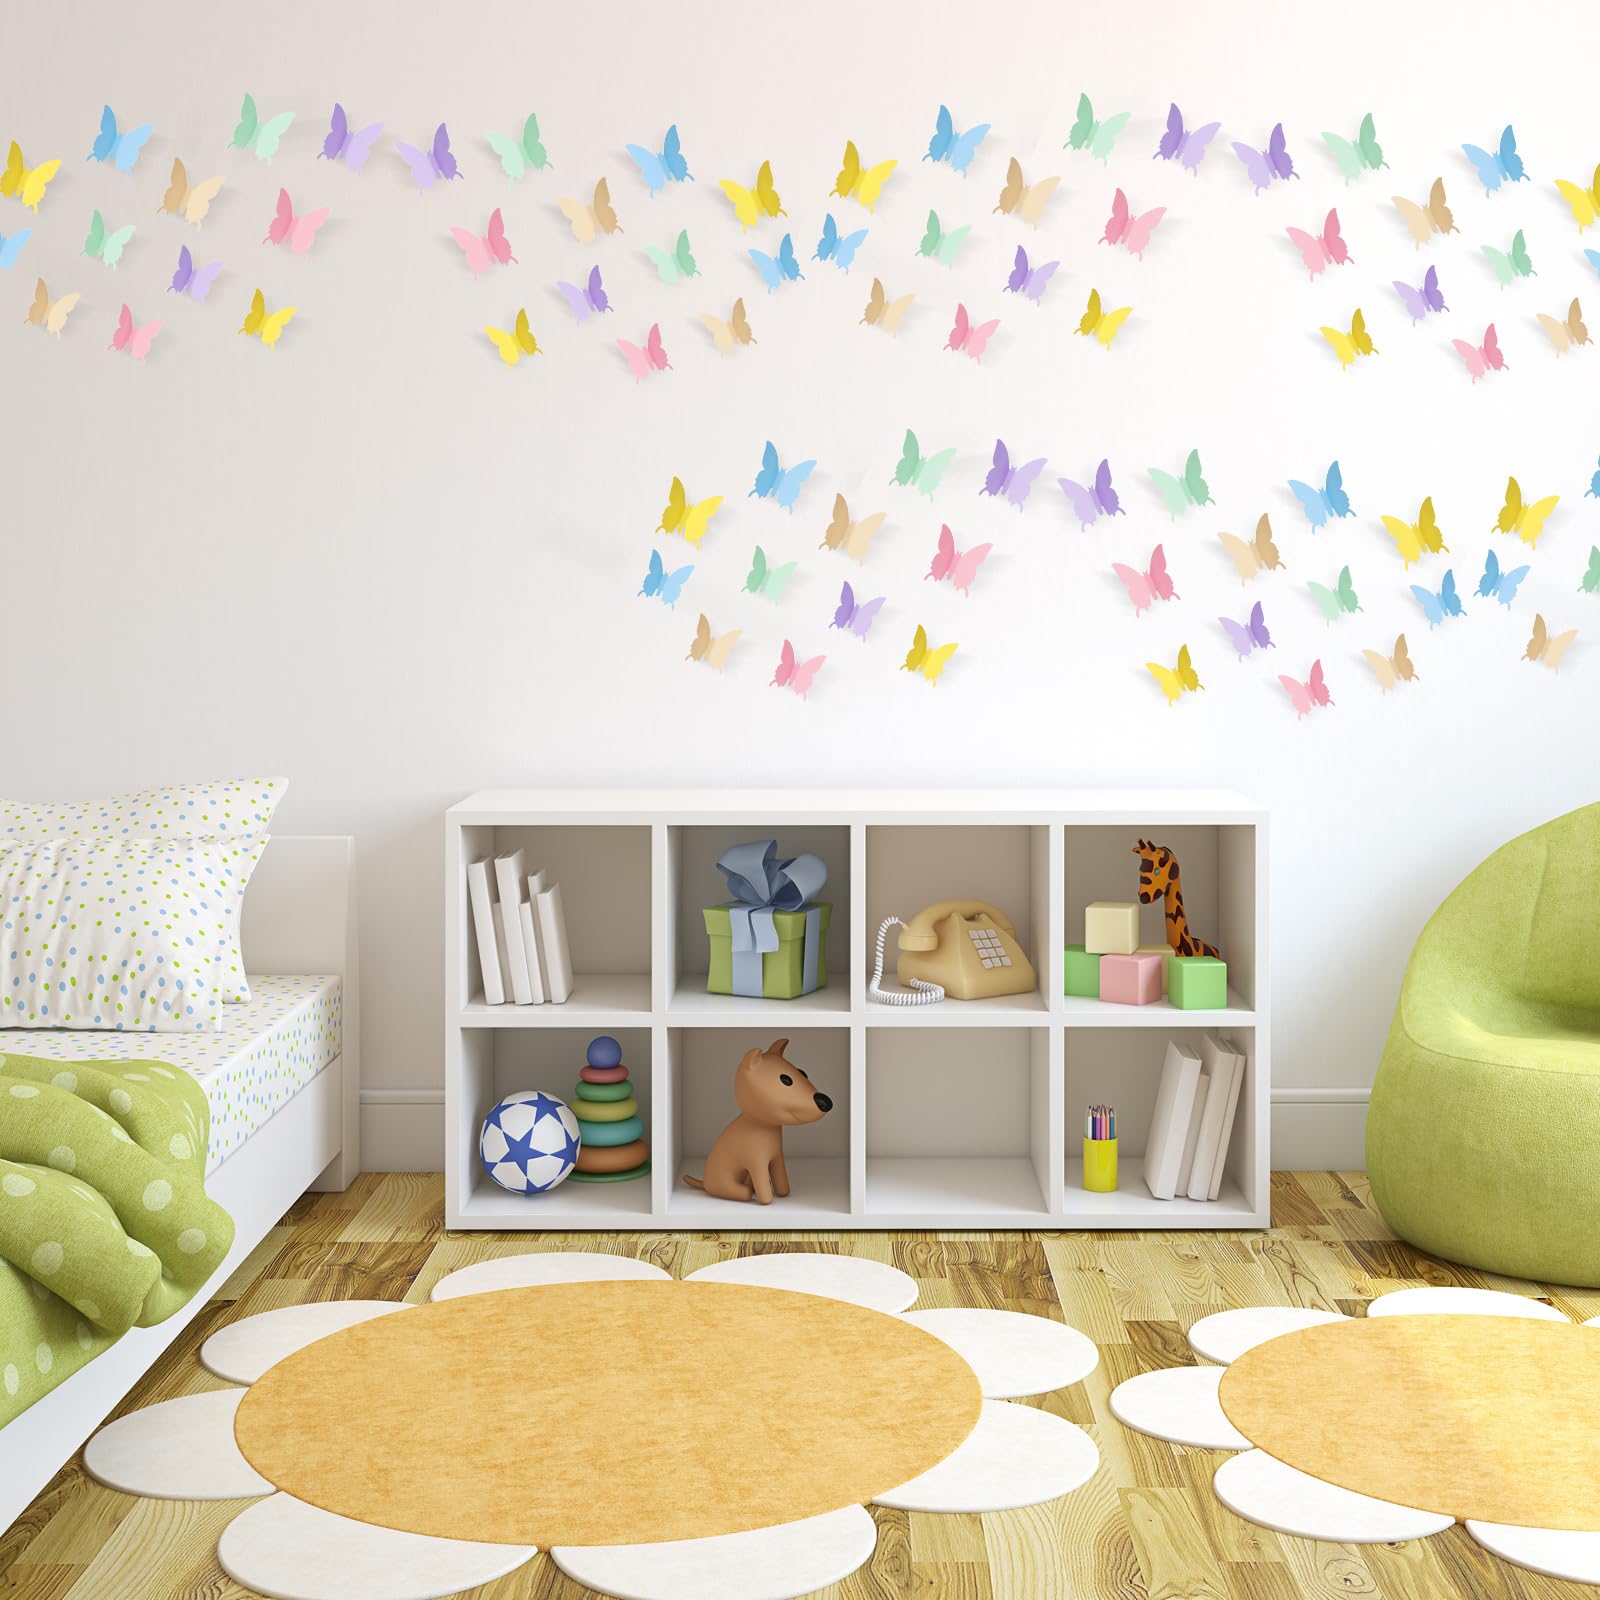 252 pcs 3D Butterfly Wall Decals Butterfly Removable Mural Stickers 3 Sizes 6 Colors Wall Decor Room Mural Kids Bedroom Decoration Wall Art Crafts for Home Bedroom Decoration